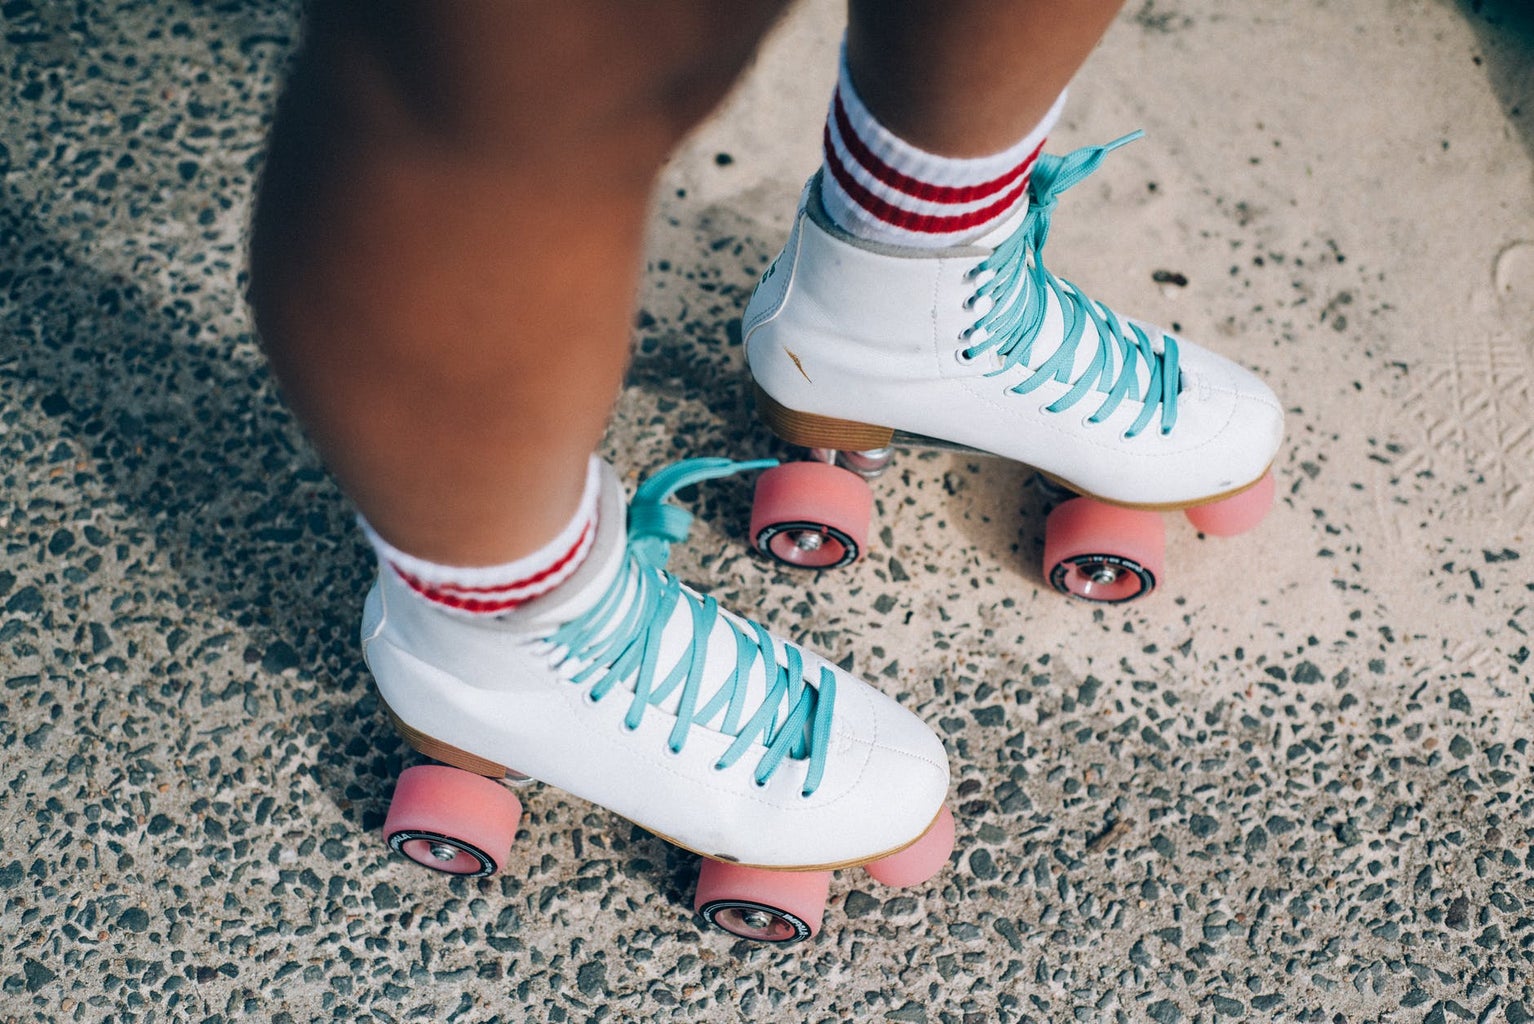 white roller skates with light blue laces and pink wheels; white socks with two red stripes on each.